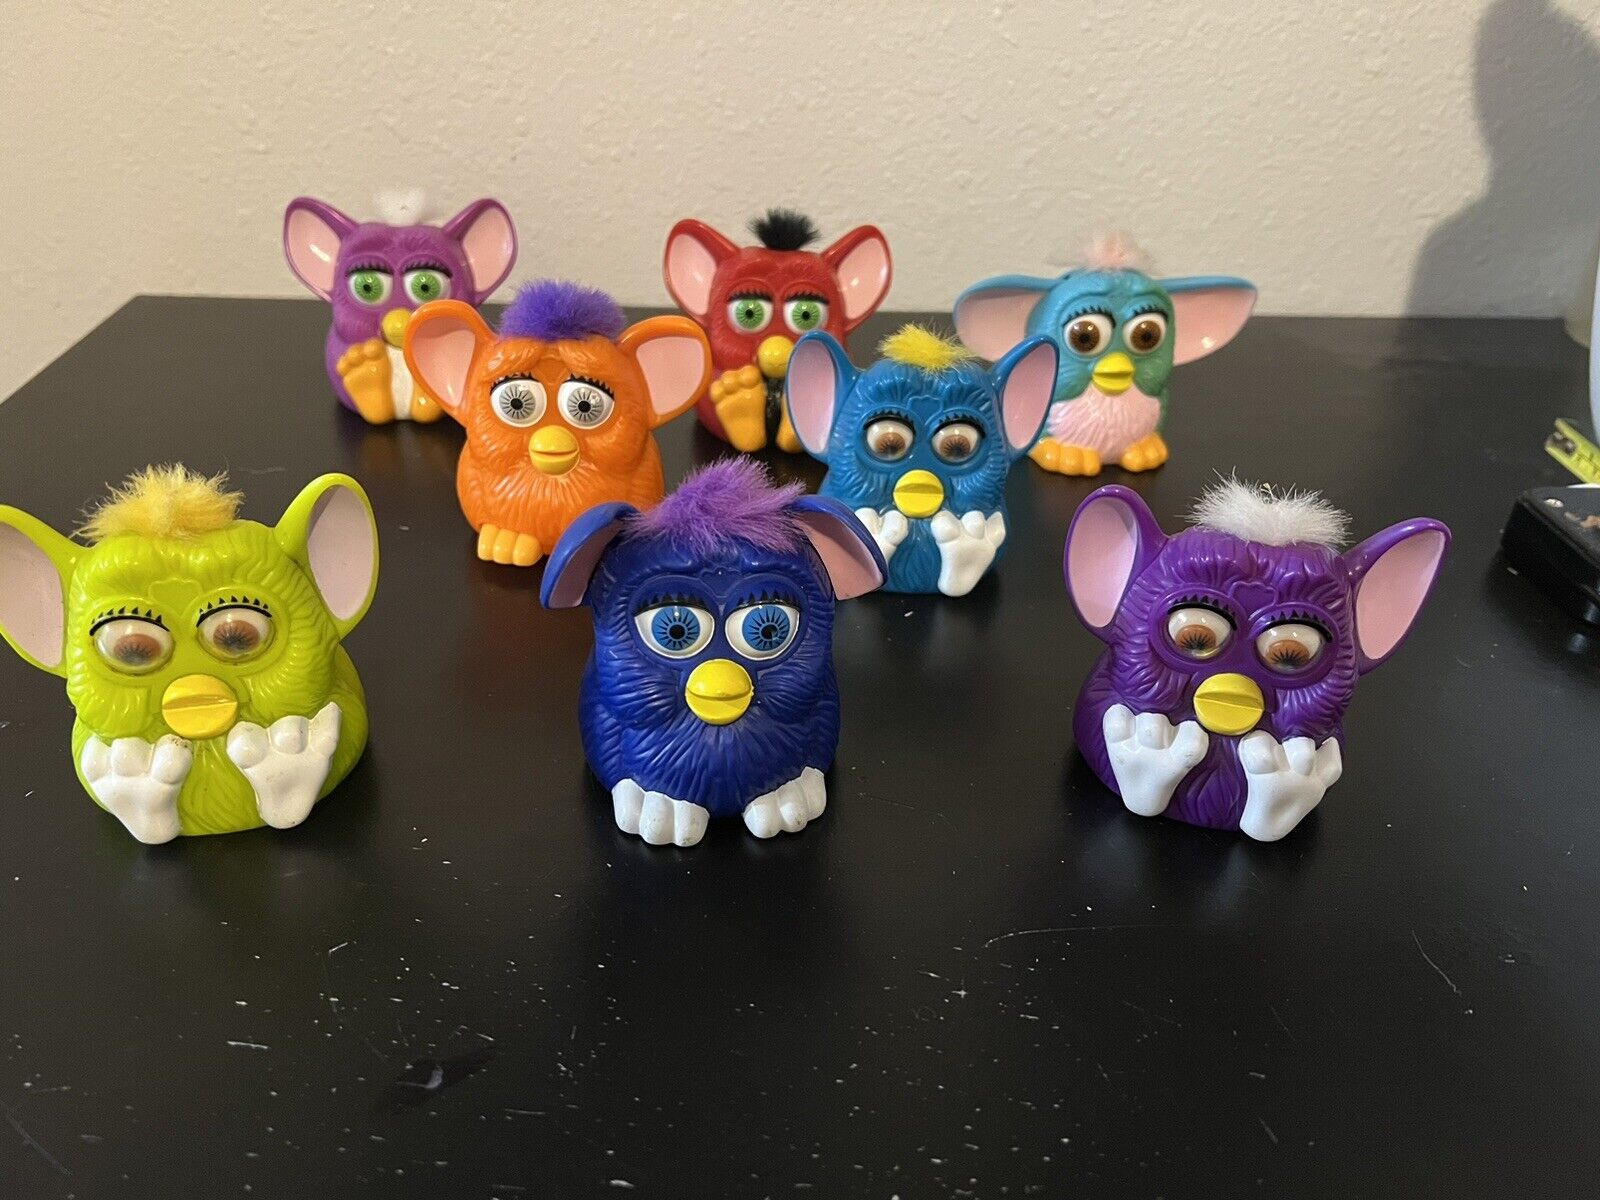 Vintage 1998 McDonald’s Toy, Furby, Lot of 8, Multiple Colors, 3” tall